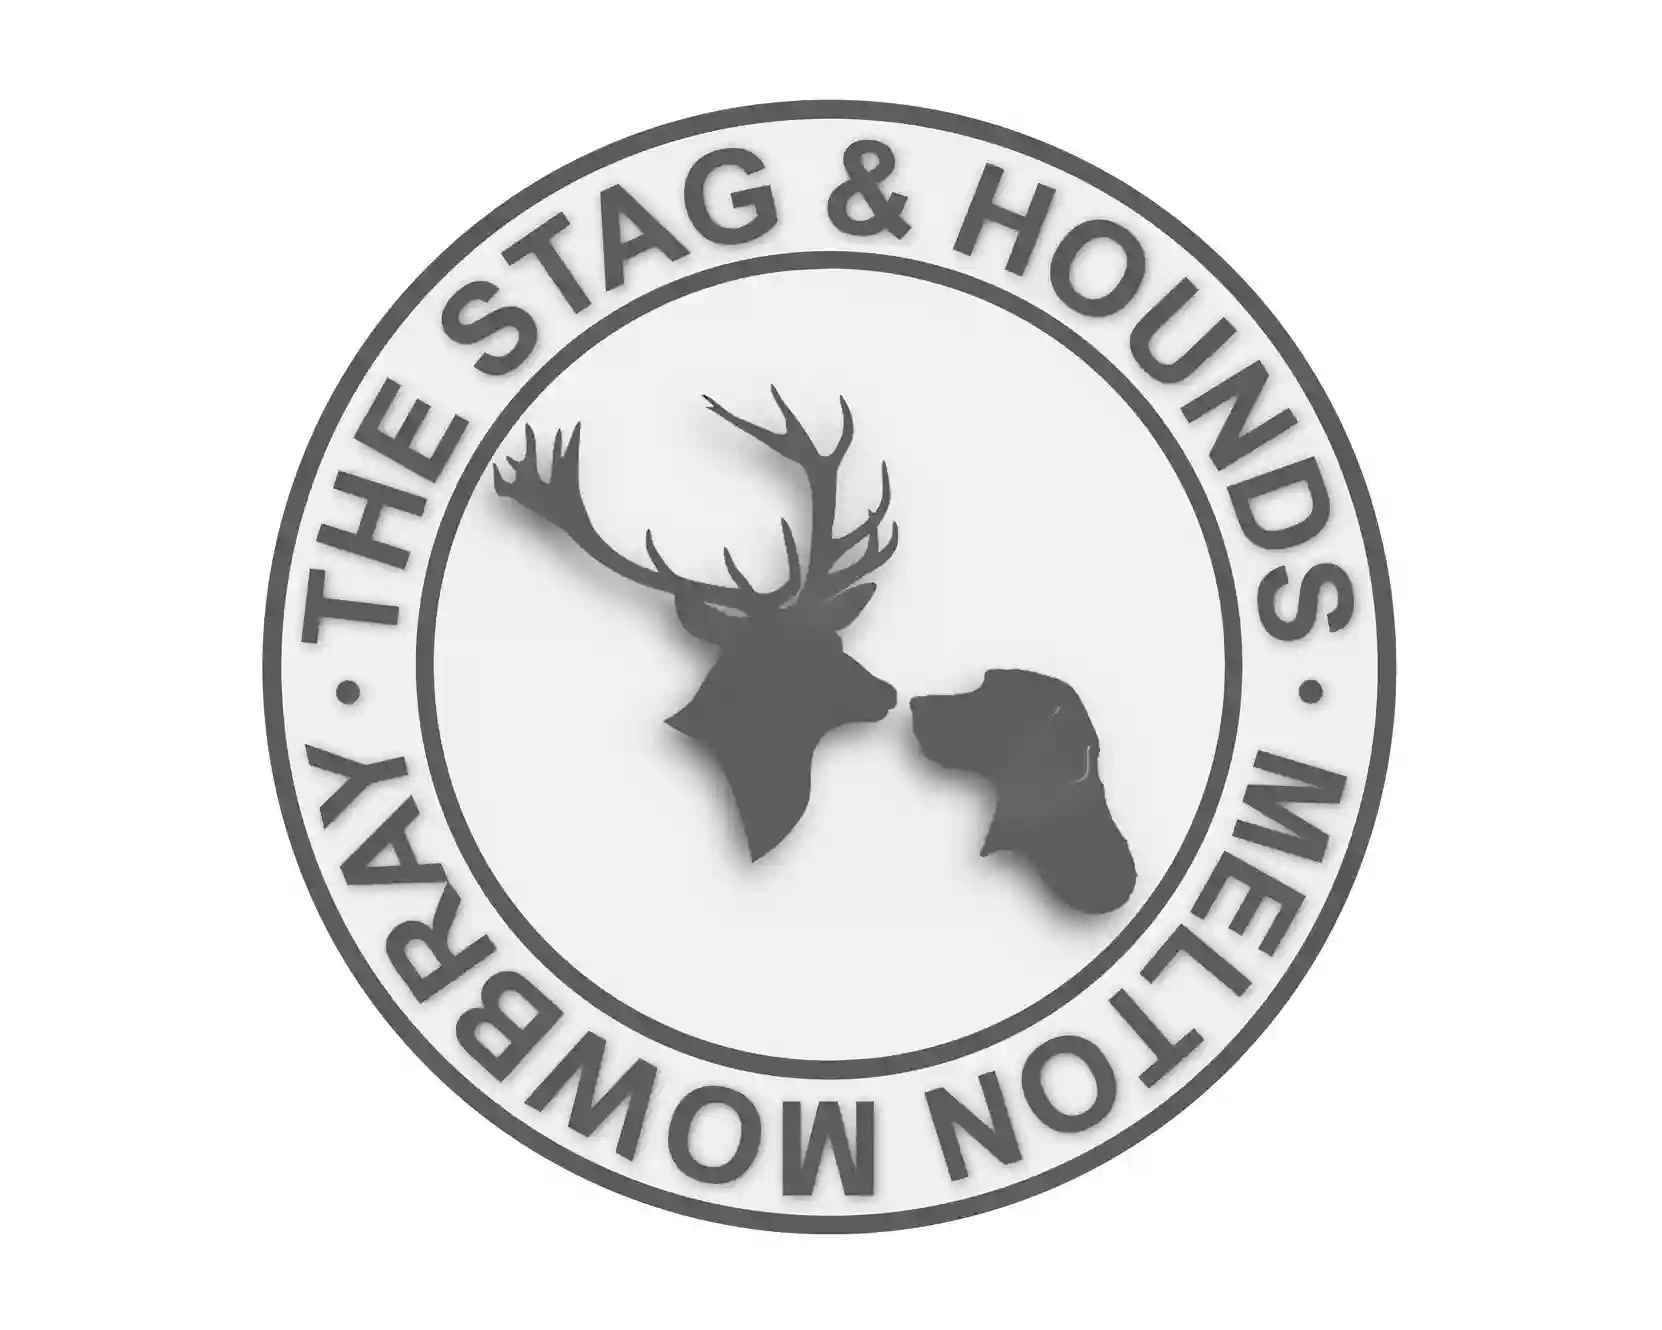 The Stag and Hounds